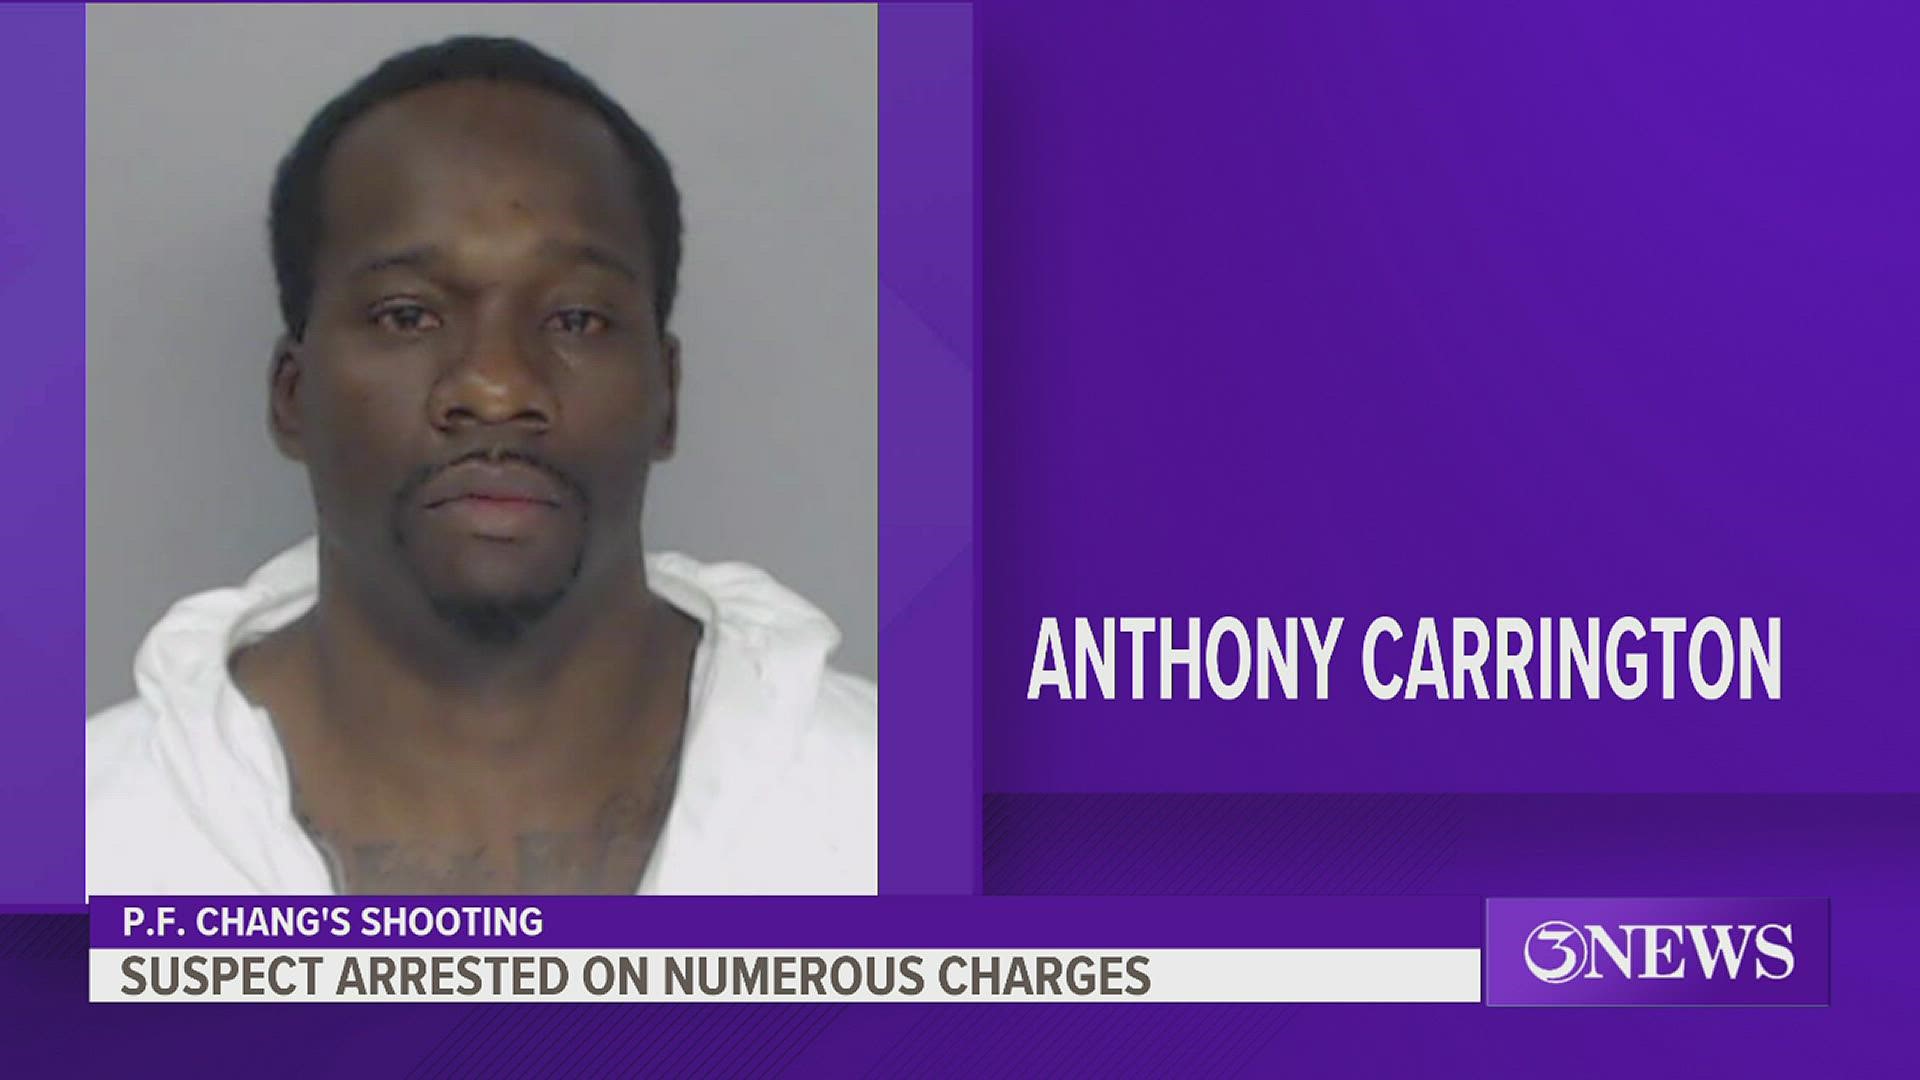 Authorities have charged Anthony Carrington, 42, with aggravated assault with a deadly weapon and unlawful possession of a firearm by a felon.